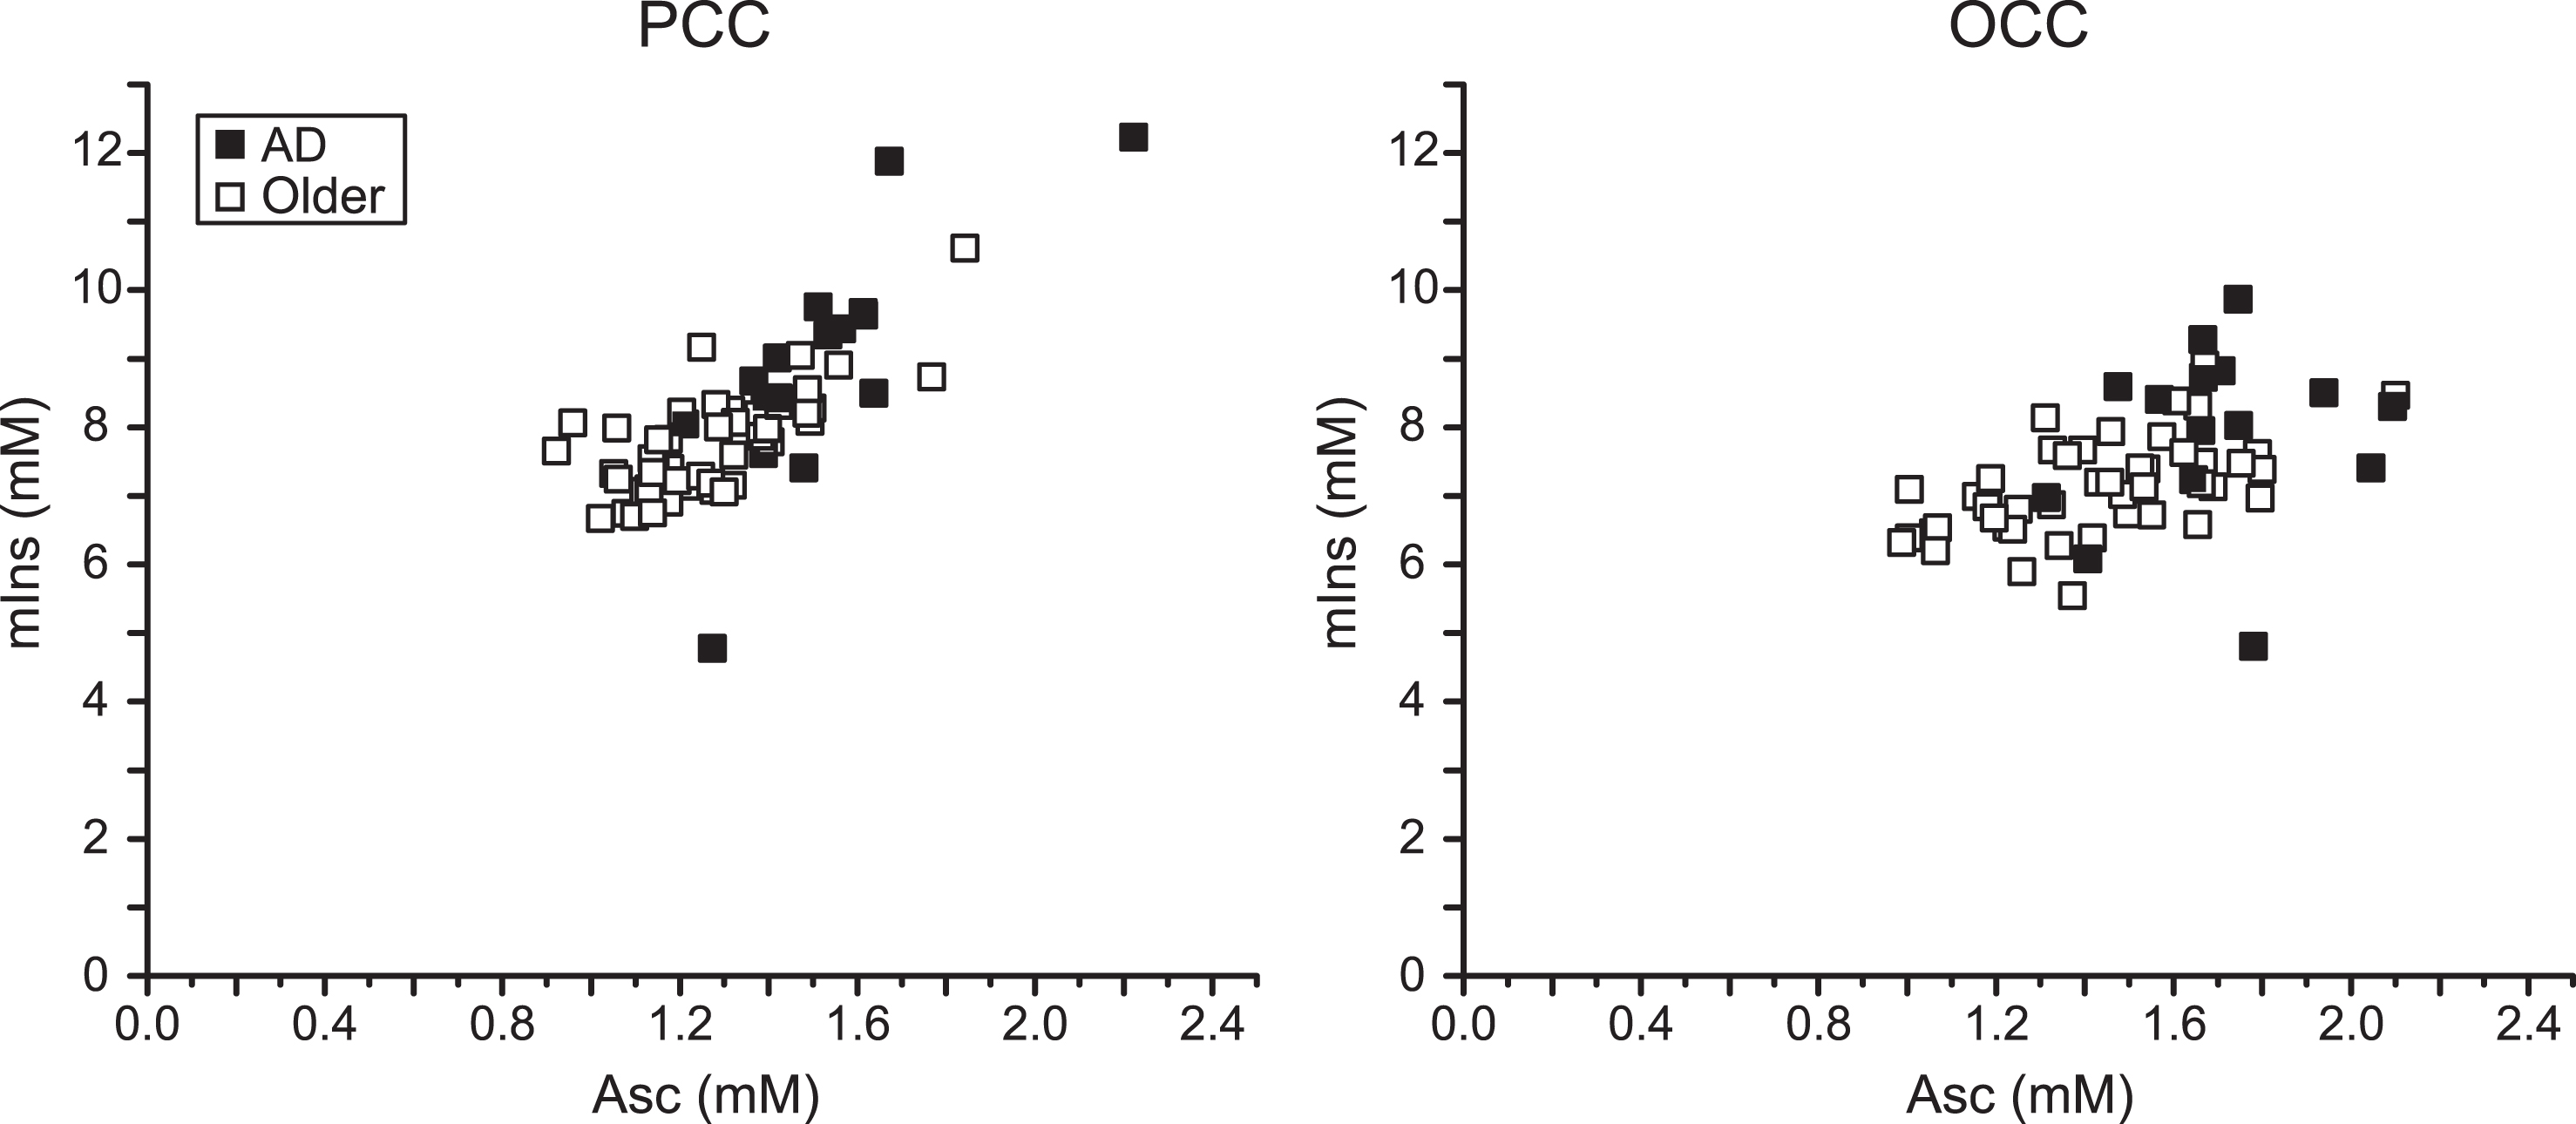 Correlation between Asc and mIns in the PCC and the OCC. Regression plots of Asc concentration with mIns concentration in the studied brain regions of older adults with AD and controls. Significant correlations were observed in both brain regions (PCC: r = 0.76, p = 1×10–12; OCC: r = 0.50, p = 4×10–5).